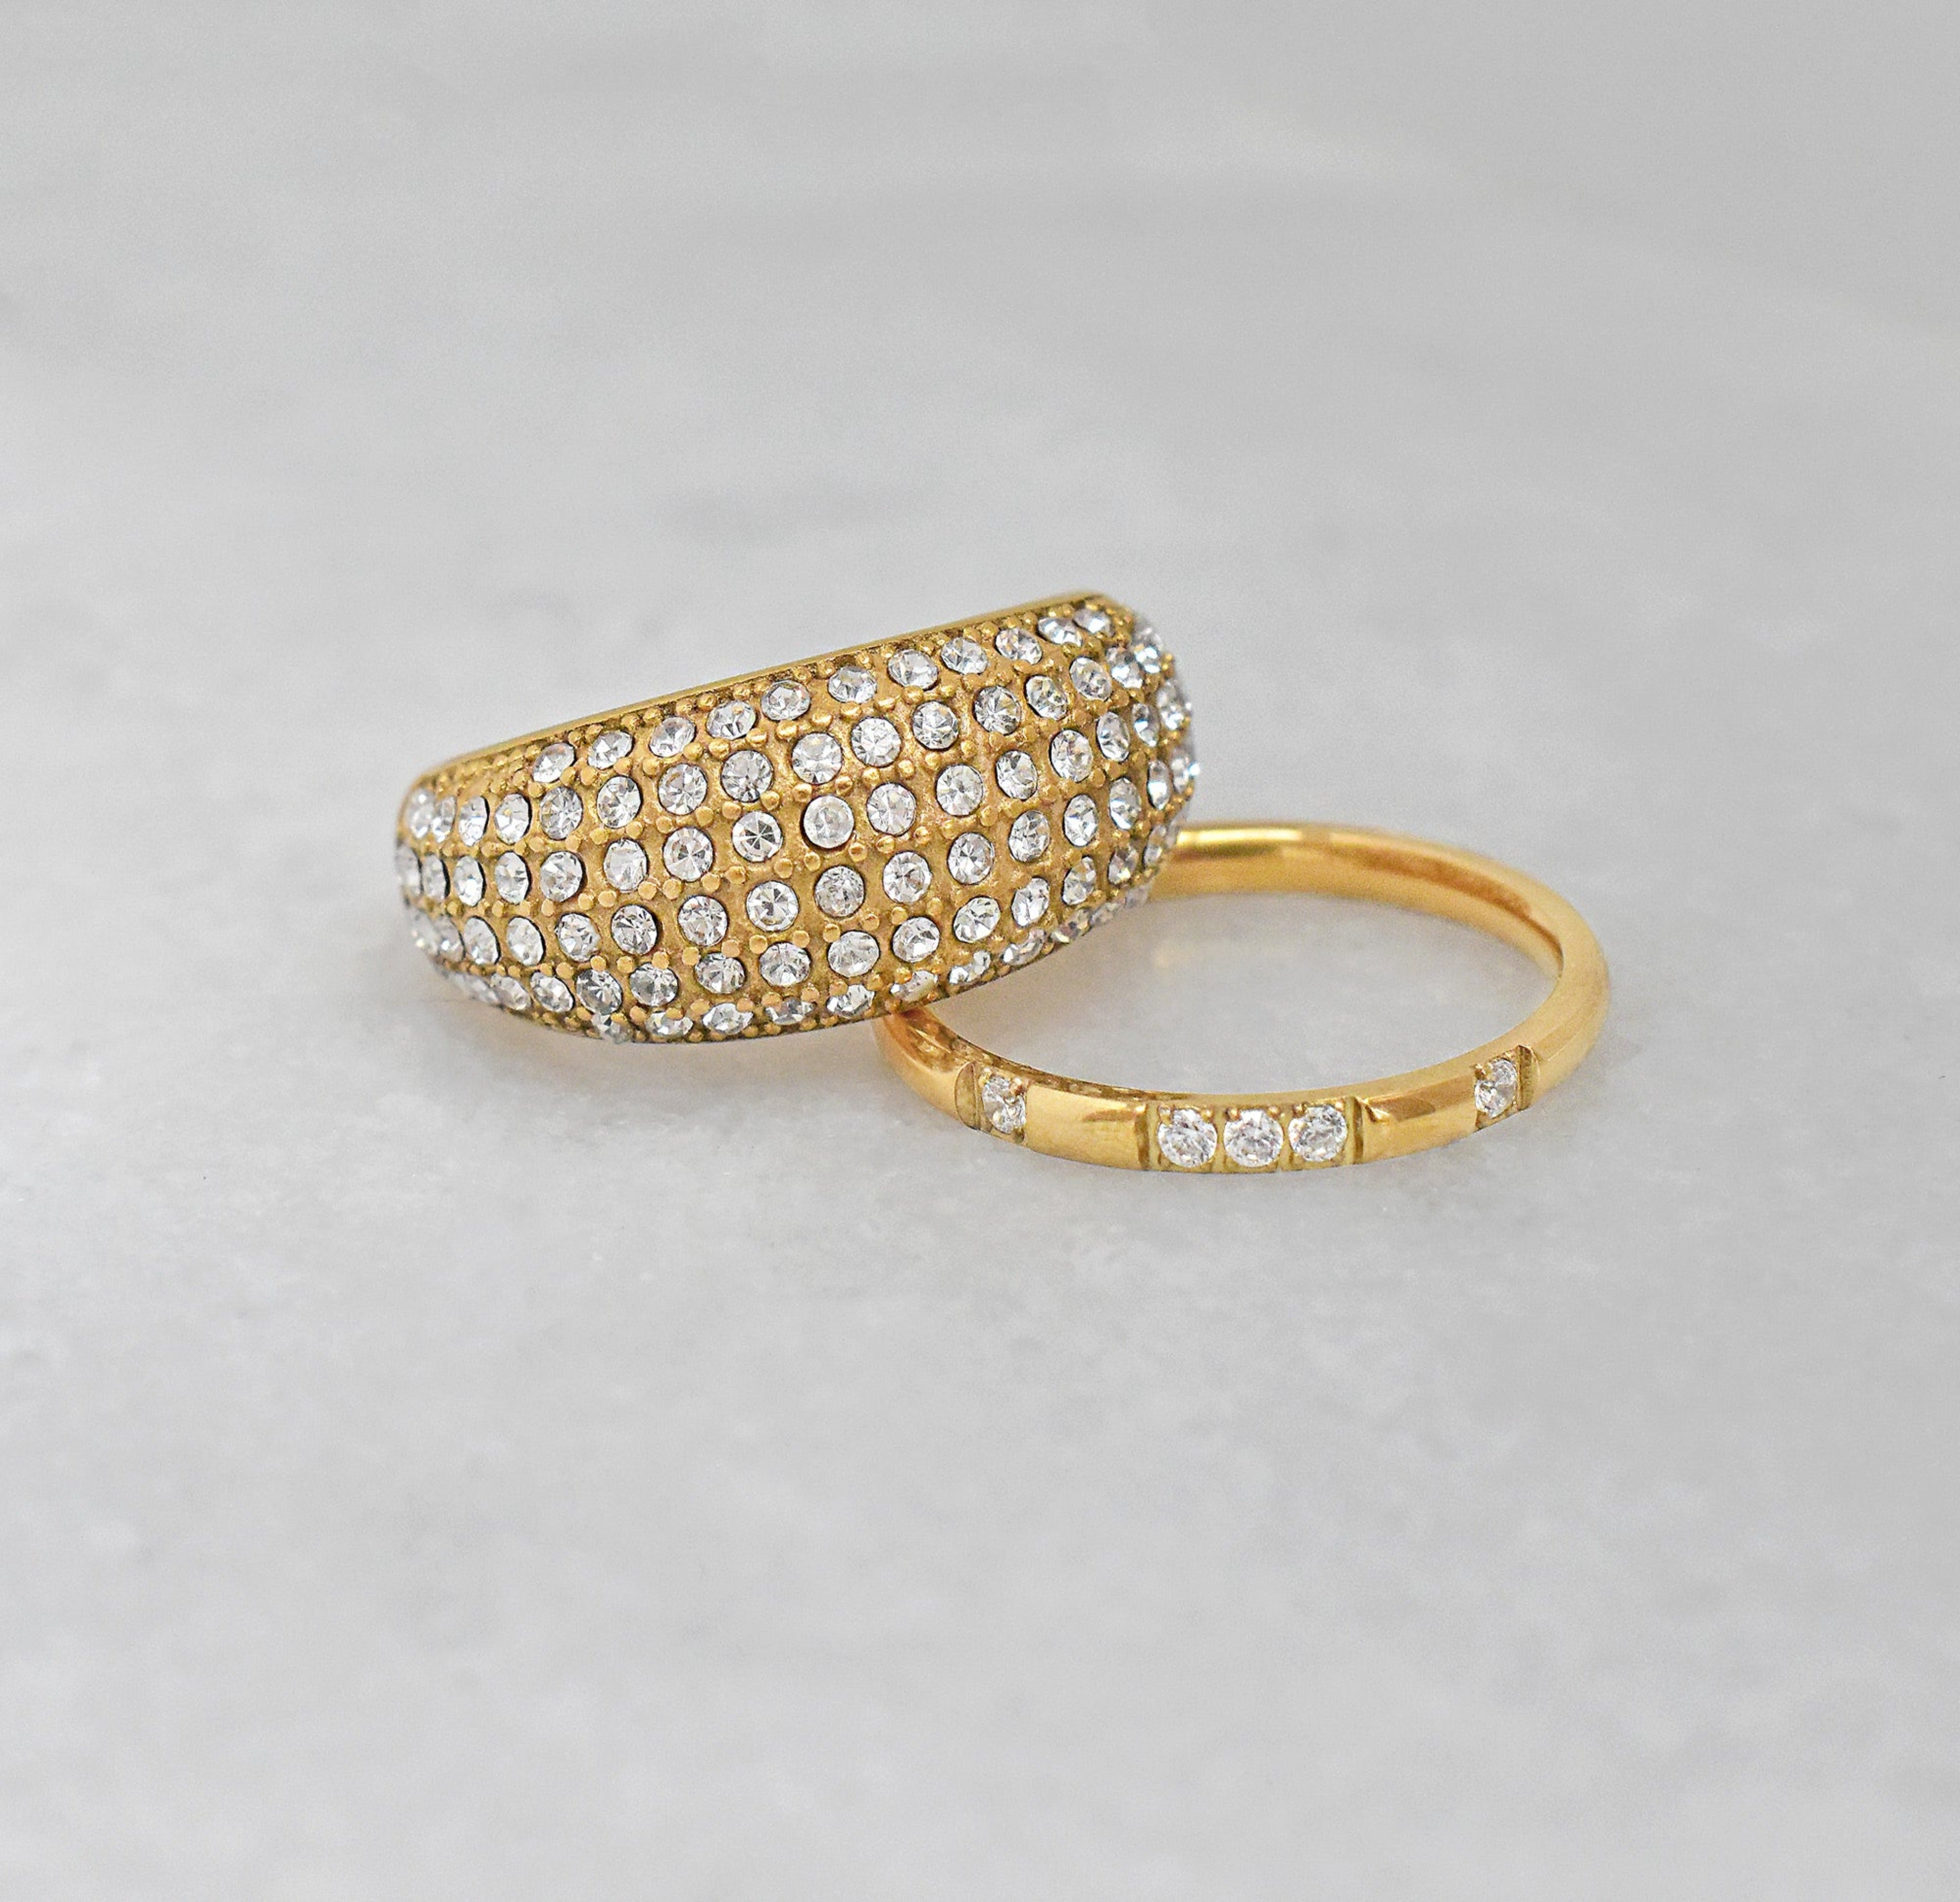 Veda thin gold pave ring band paired with pave dome ring. Gold waterproof jewelry